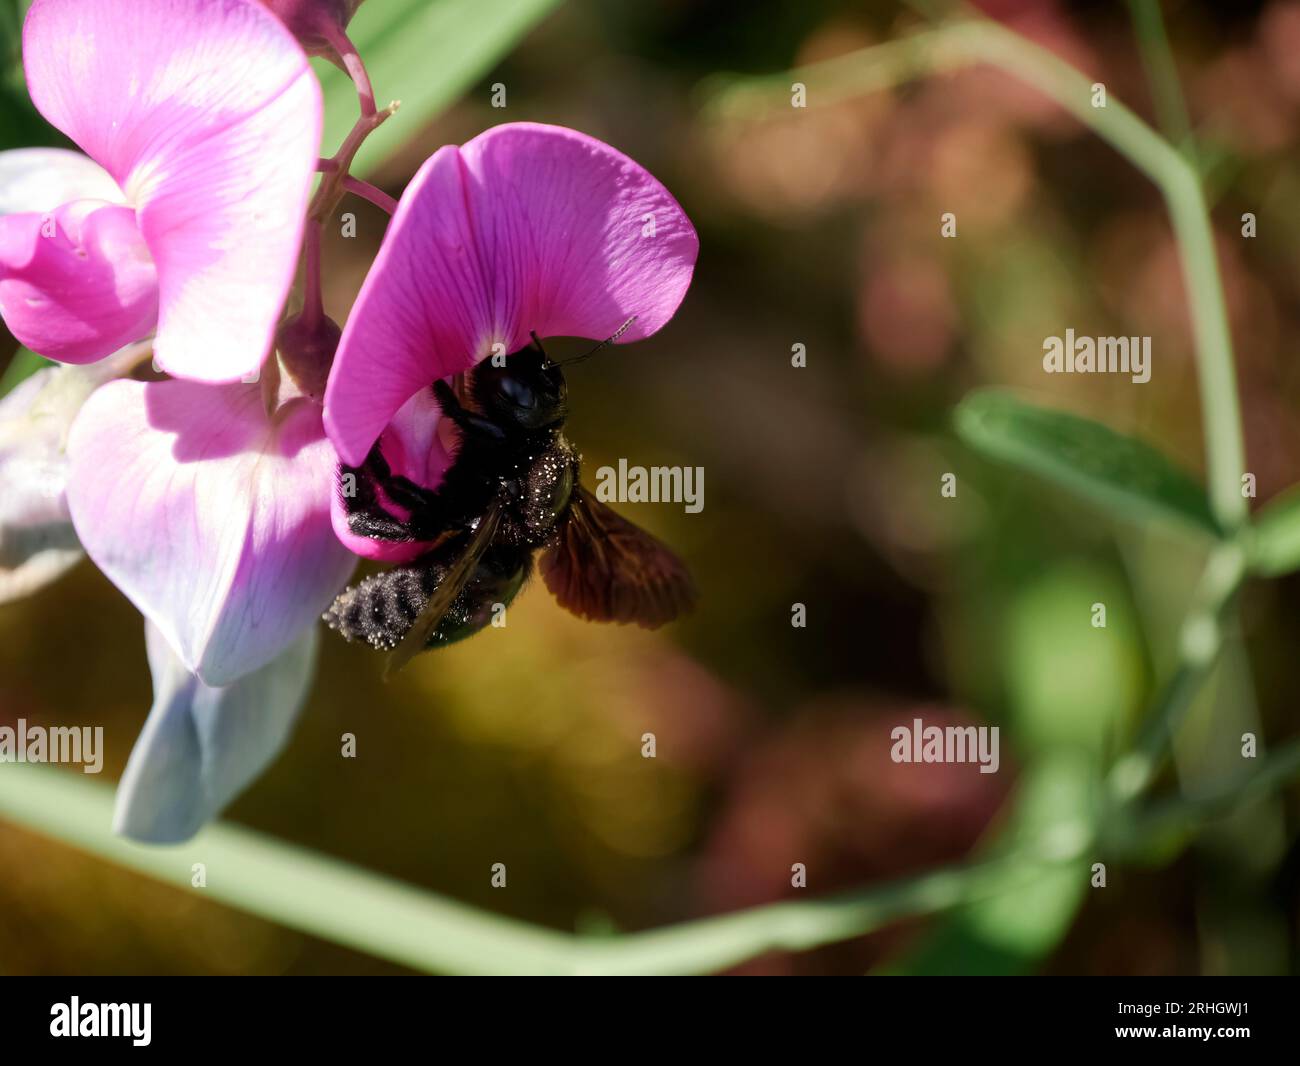 Xylocopa carpenter bee on pink orchid flower. Black solitary bee pollinating flowers. Stock Photo